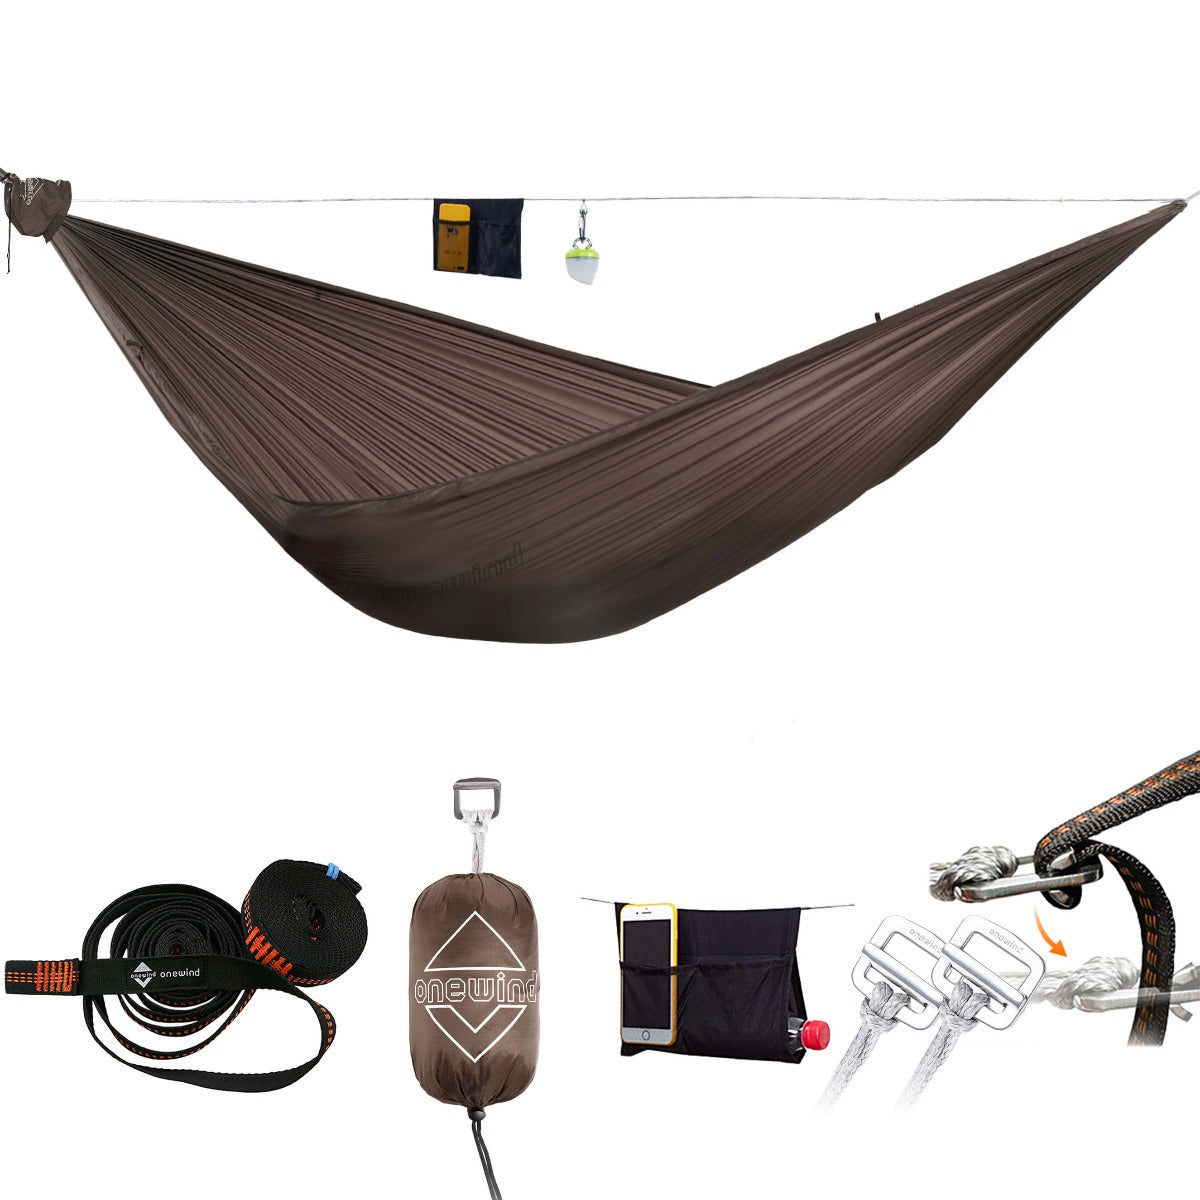 Budget Camping Hammock | Onewind Outdoors